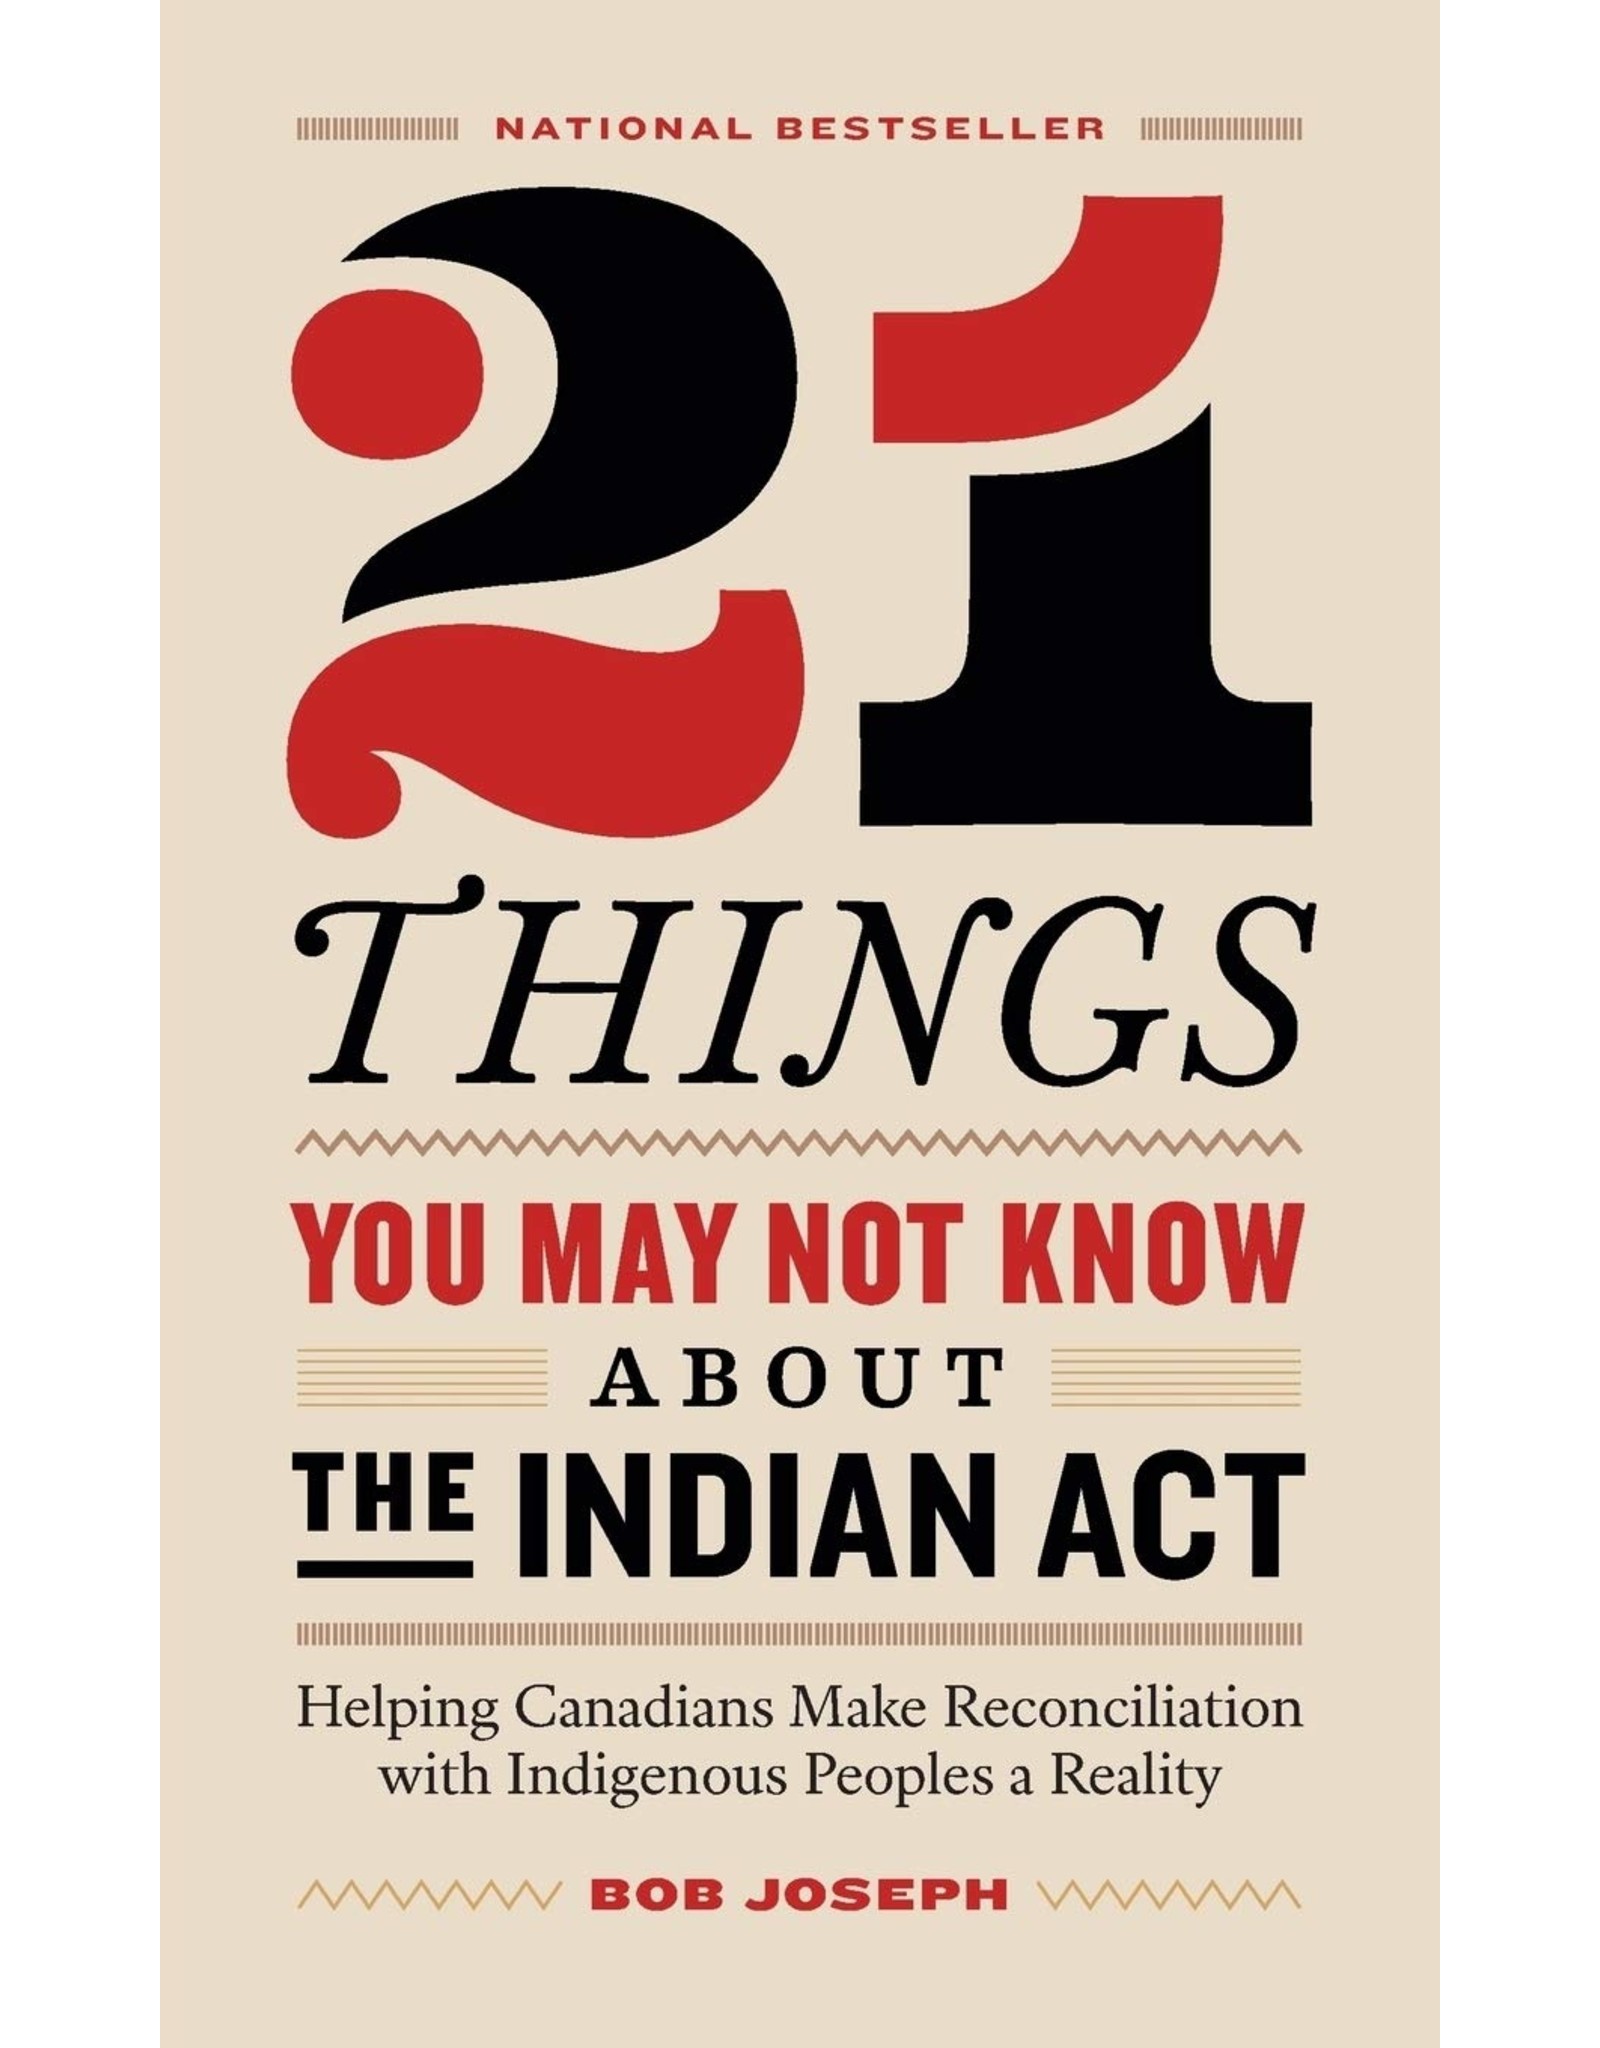 Literature 21 Things You May Not Know About the Indian Act: Helping Canadians Make Reconciliation with Indigenous Peoples a Reality